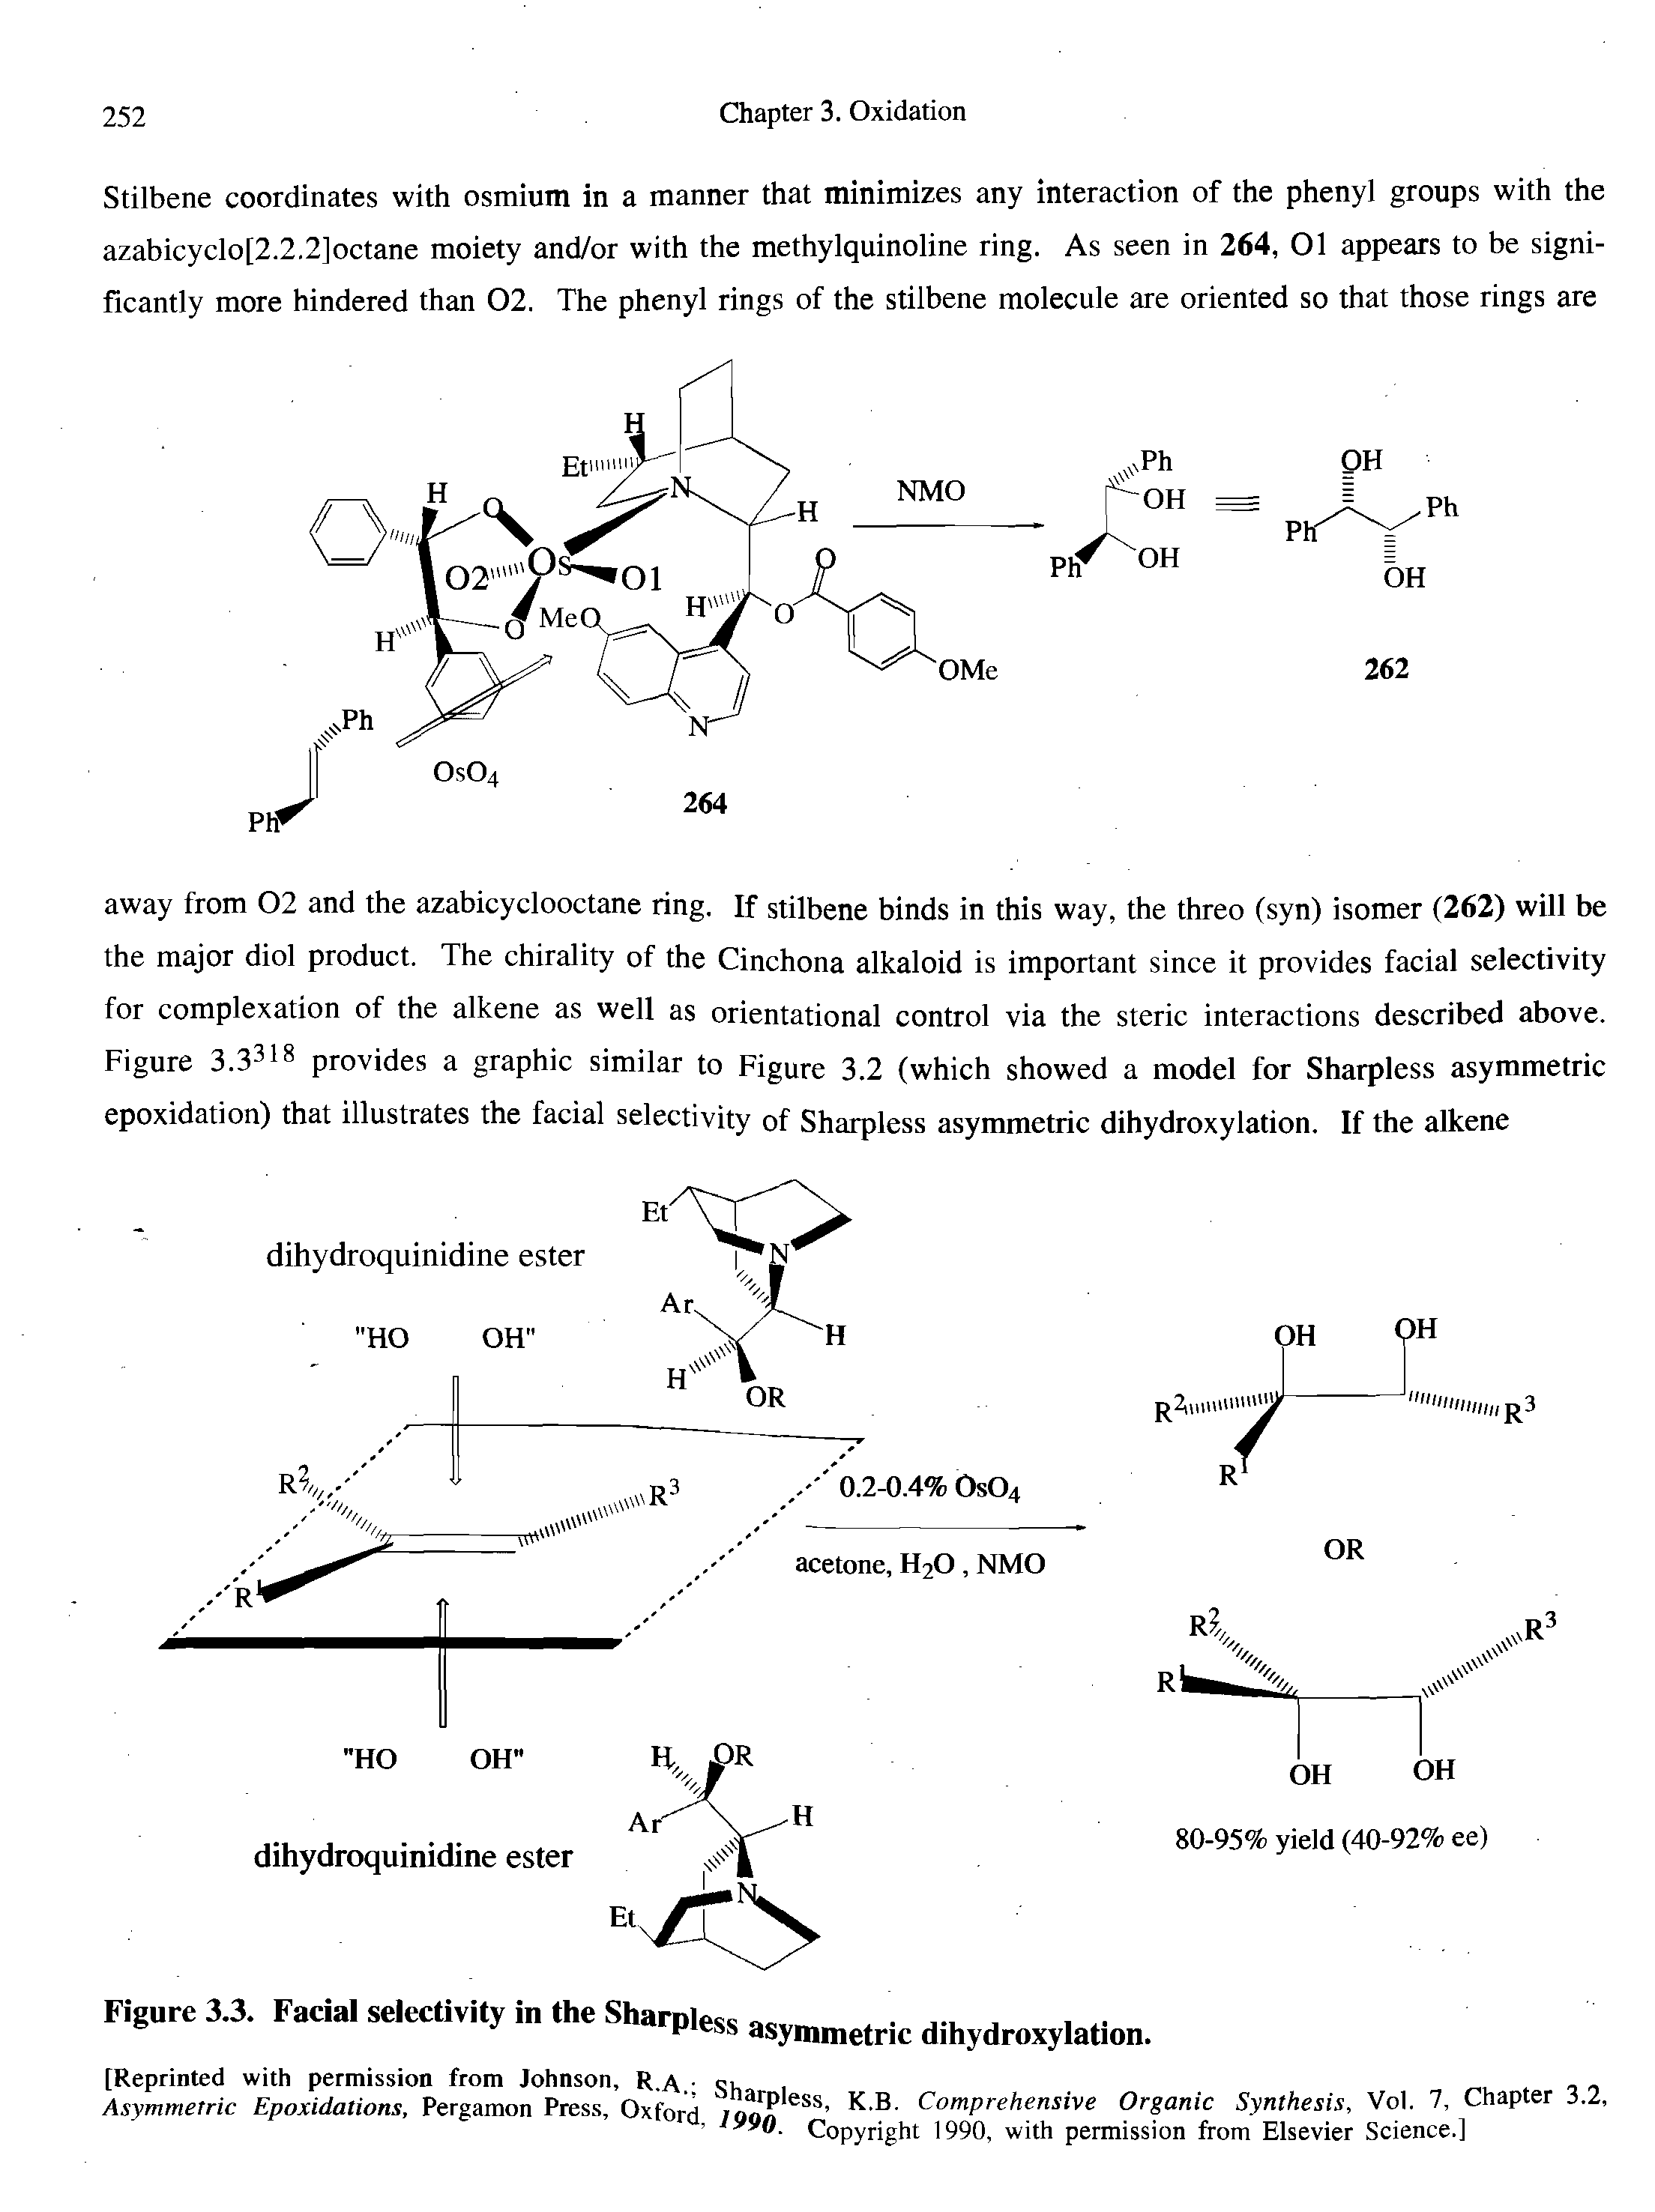 Figure 3.3. Facial selectivity in the Sharnlese 6 J asymmetric dihydroxylation.